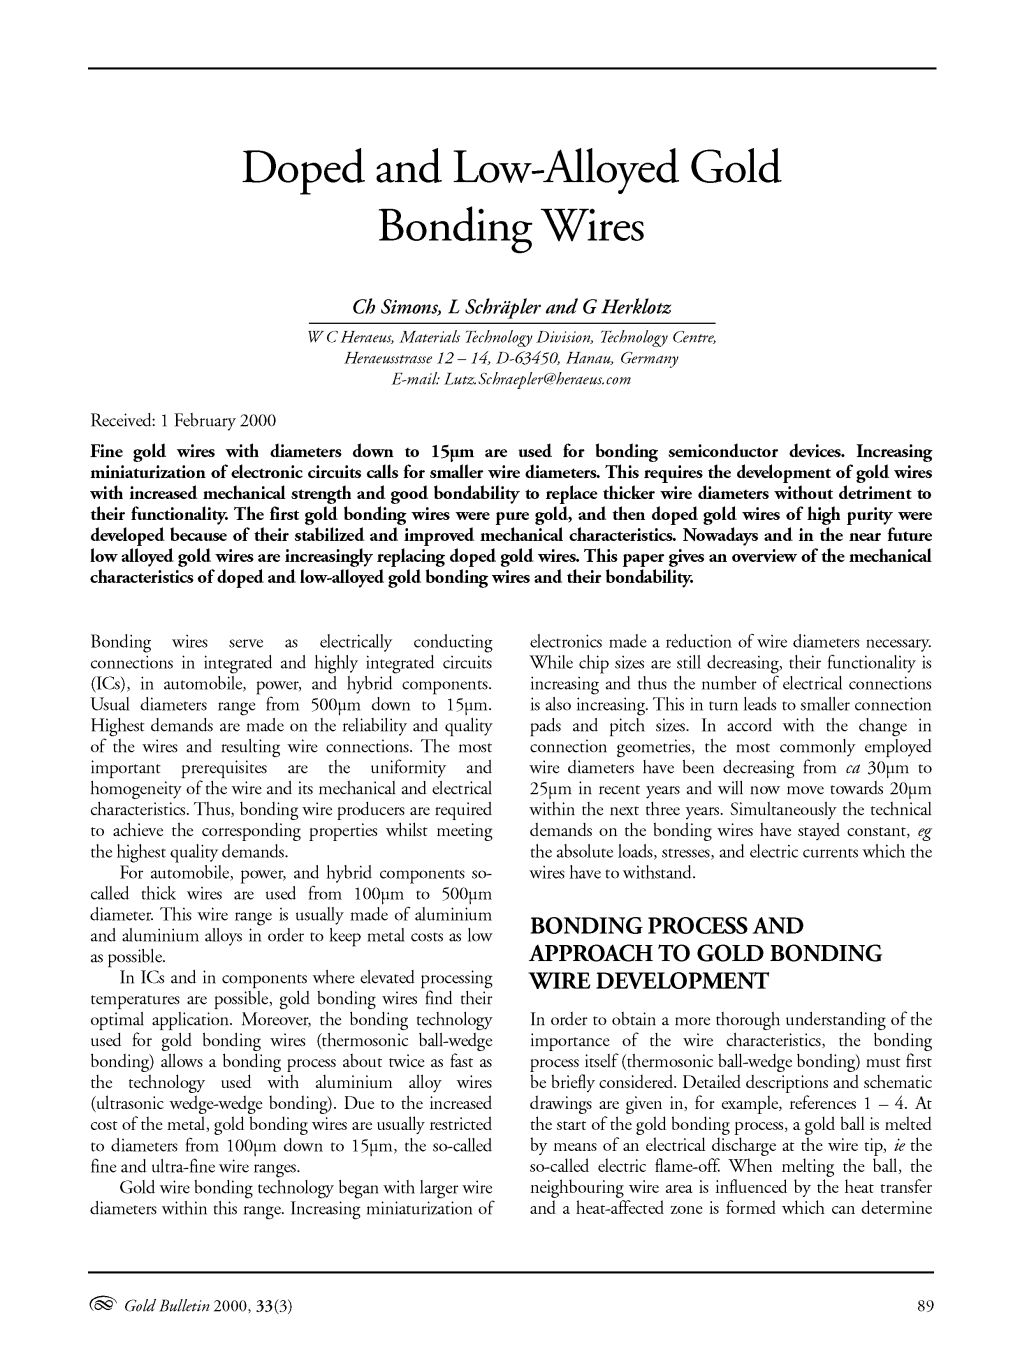 Doped and Low-Alloyed Gold Bonding Wires